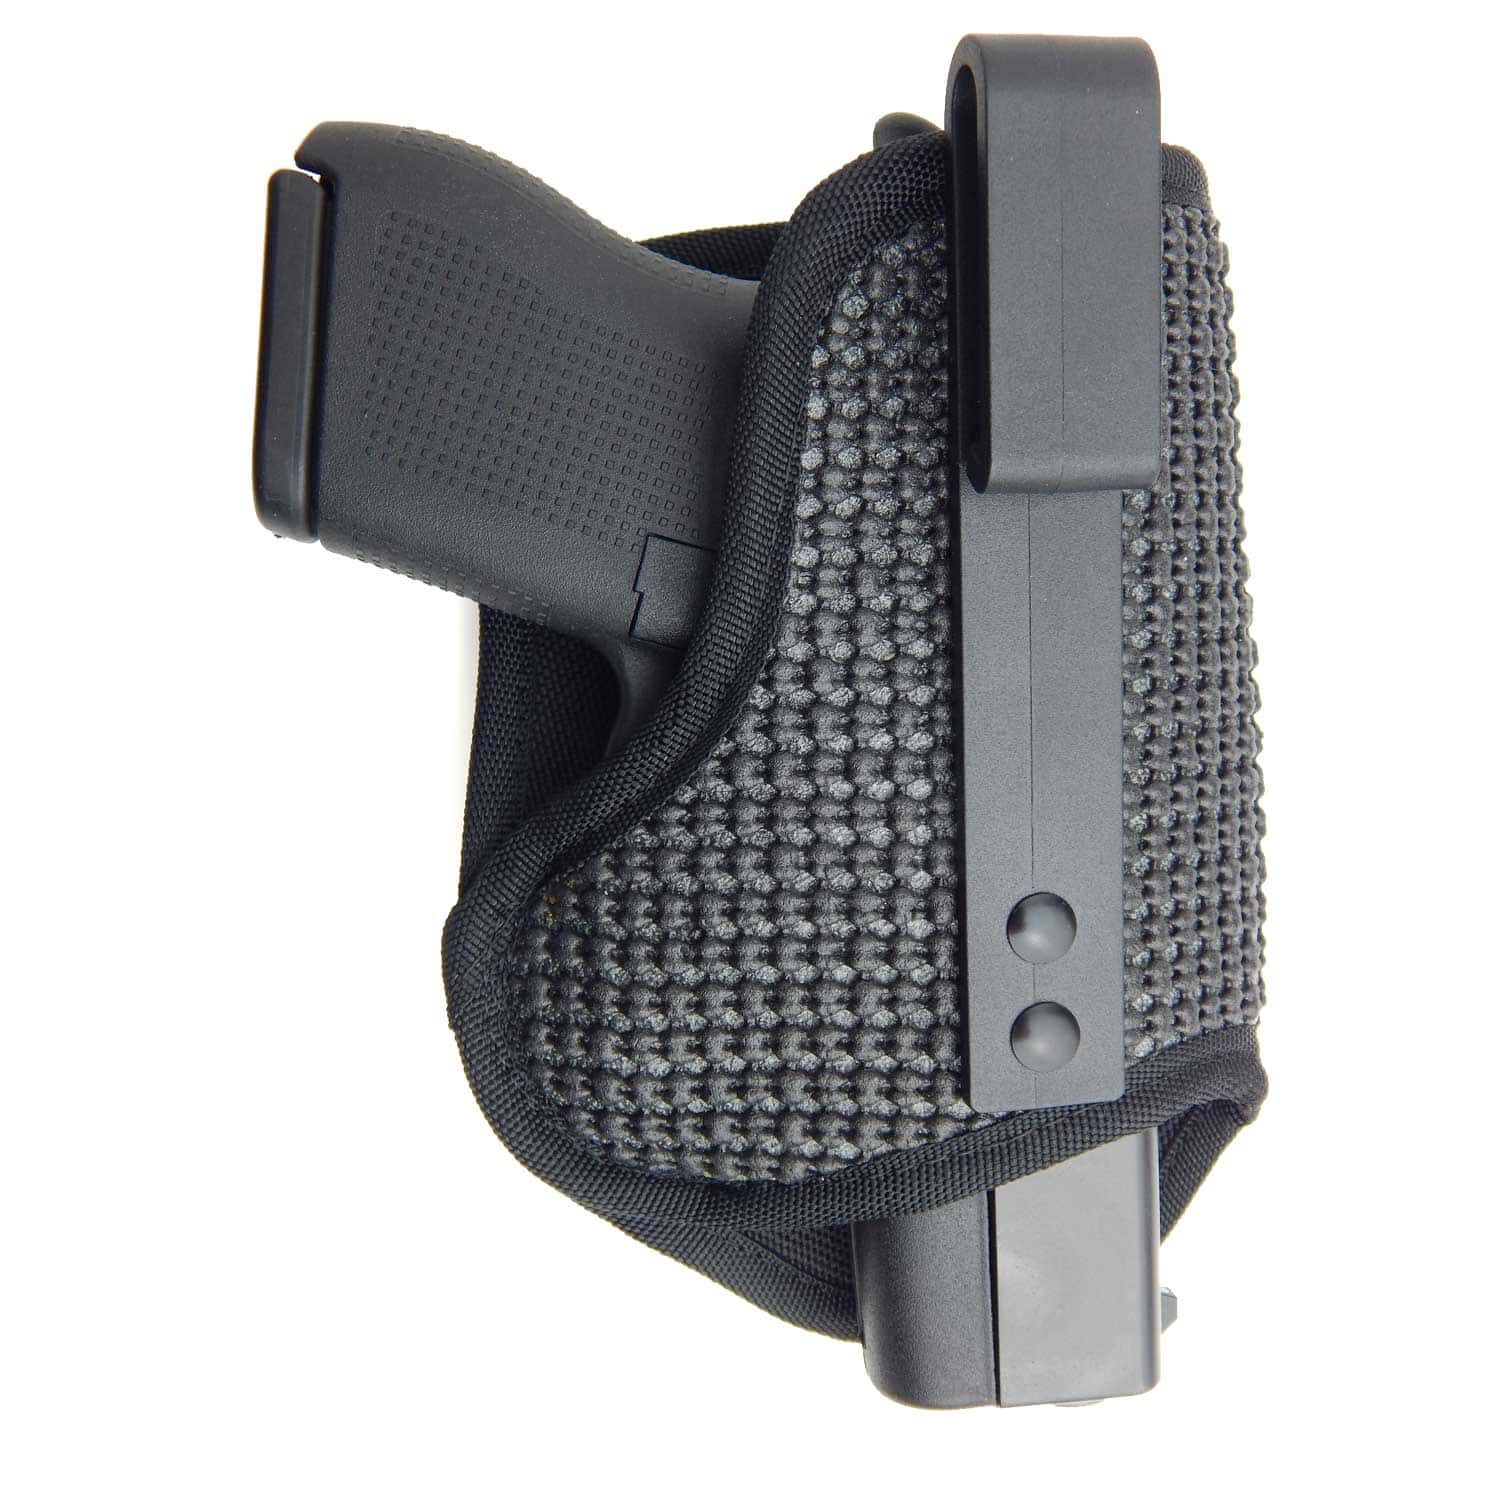 1. The Importance of Holsters for Deep Concealment